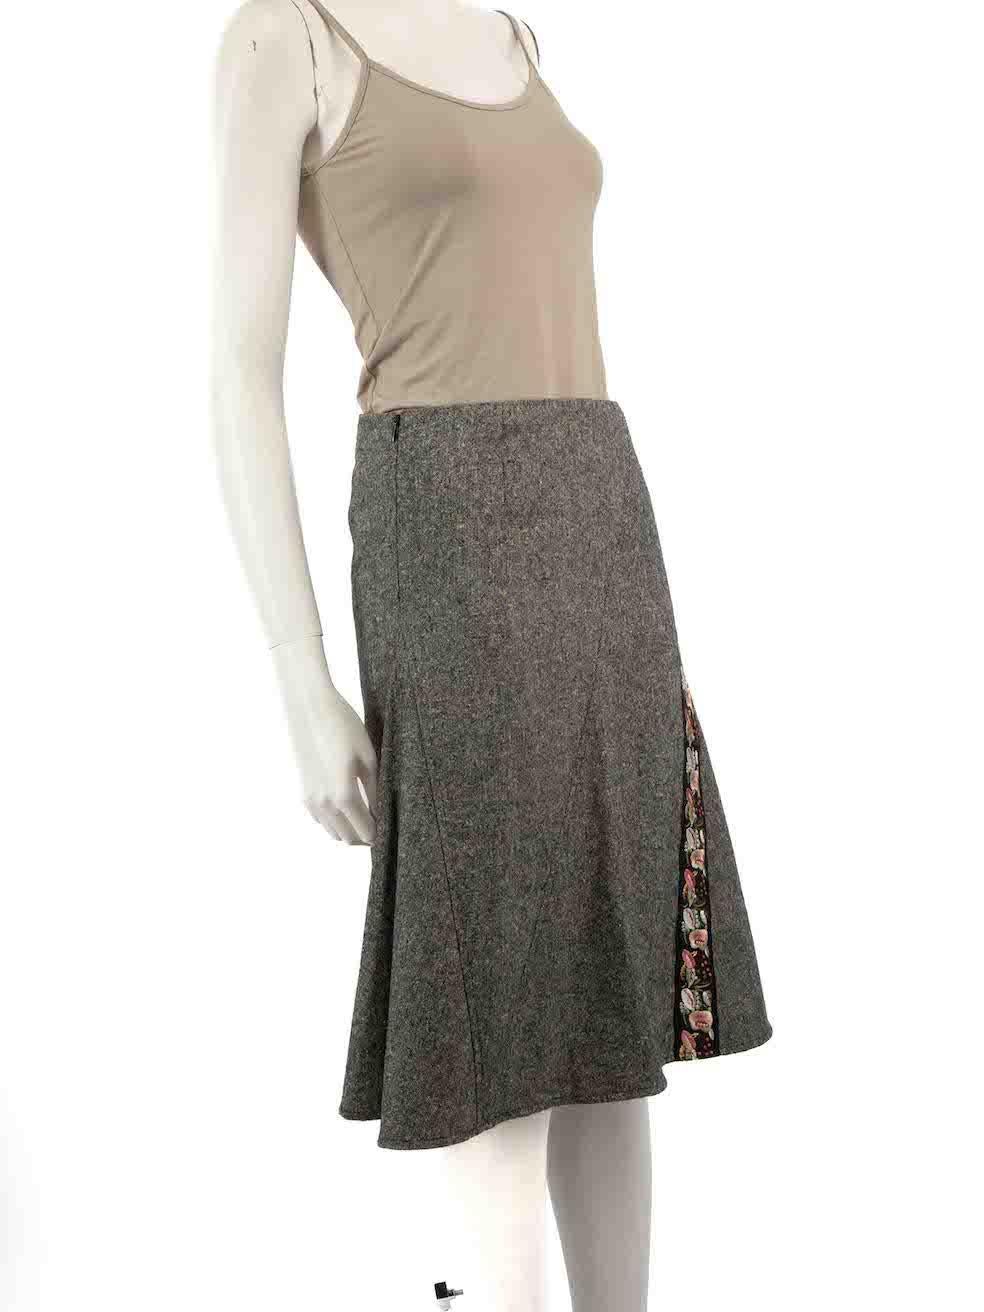 CONDITION is Very Good . Hardly any visible wear to skirt is evident on this used Kenzo designer resale item.
 
 
 
 Details
 
 
 Grey
 
 Wool
 
 Skirt
 
 A-line
 
 Knee length
 
 Floral embroidered detail
 
 Back zip fastening
 
 
 
 
 
 
 
